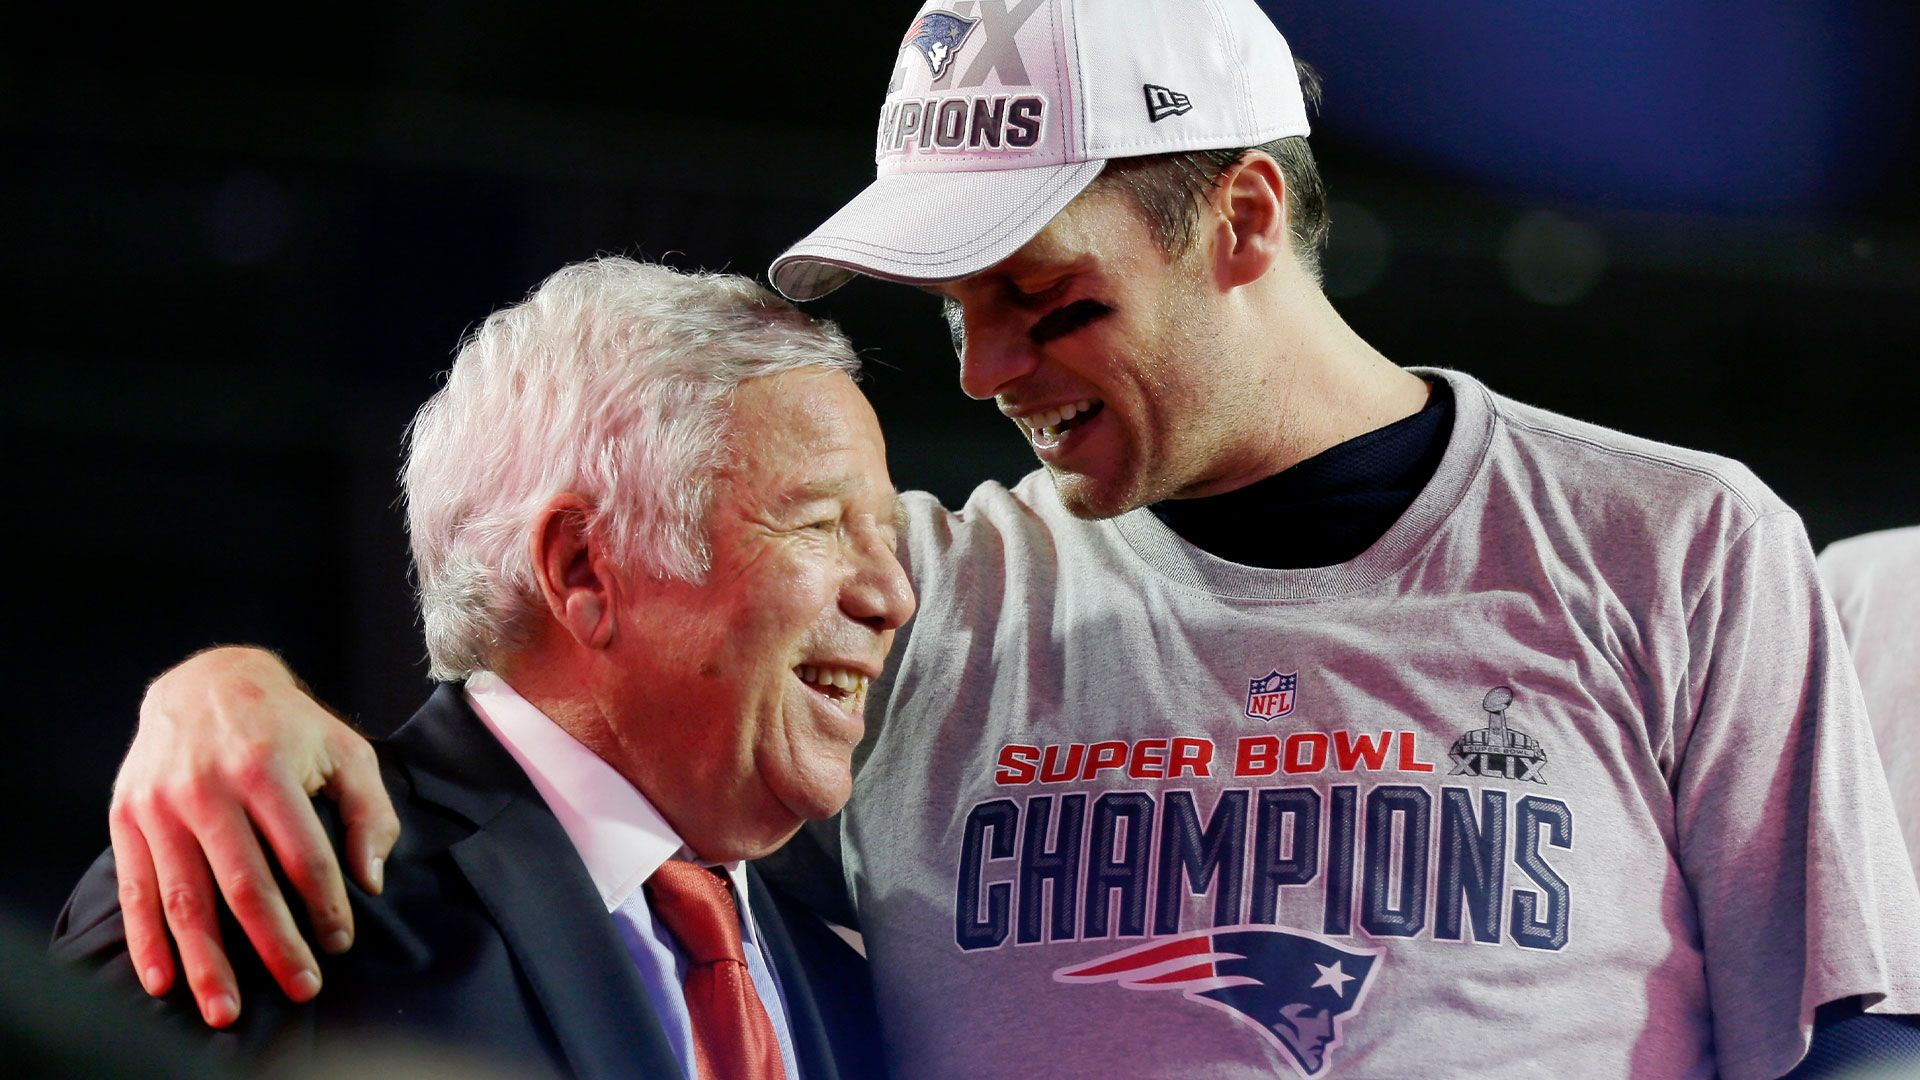 He's really excited': Patriots owner Robert Kraft reveals new details about Tom  Brady celebration